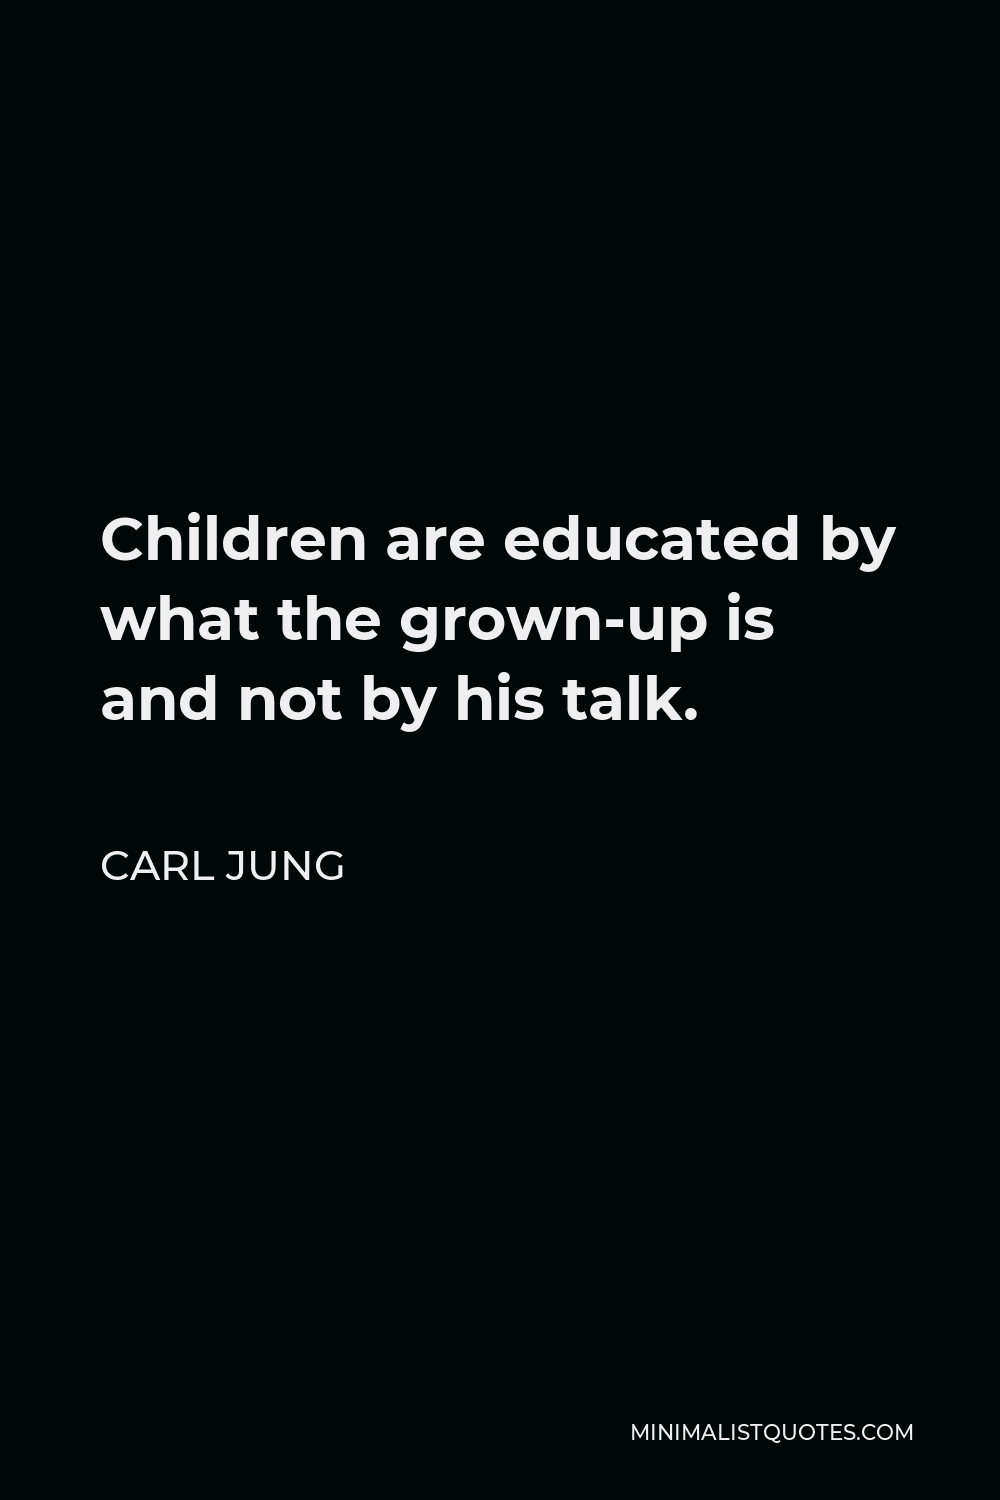 Carl Jung Quote - Children are educated by what the grown-up is and not by his talk.